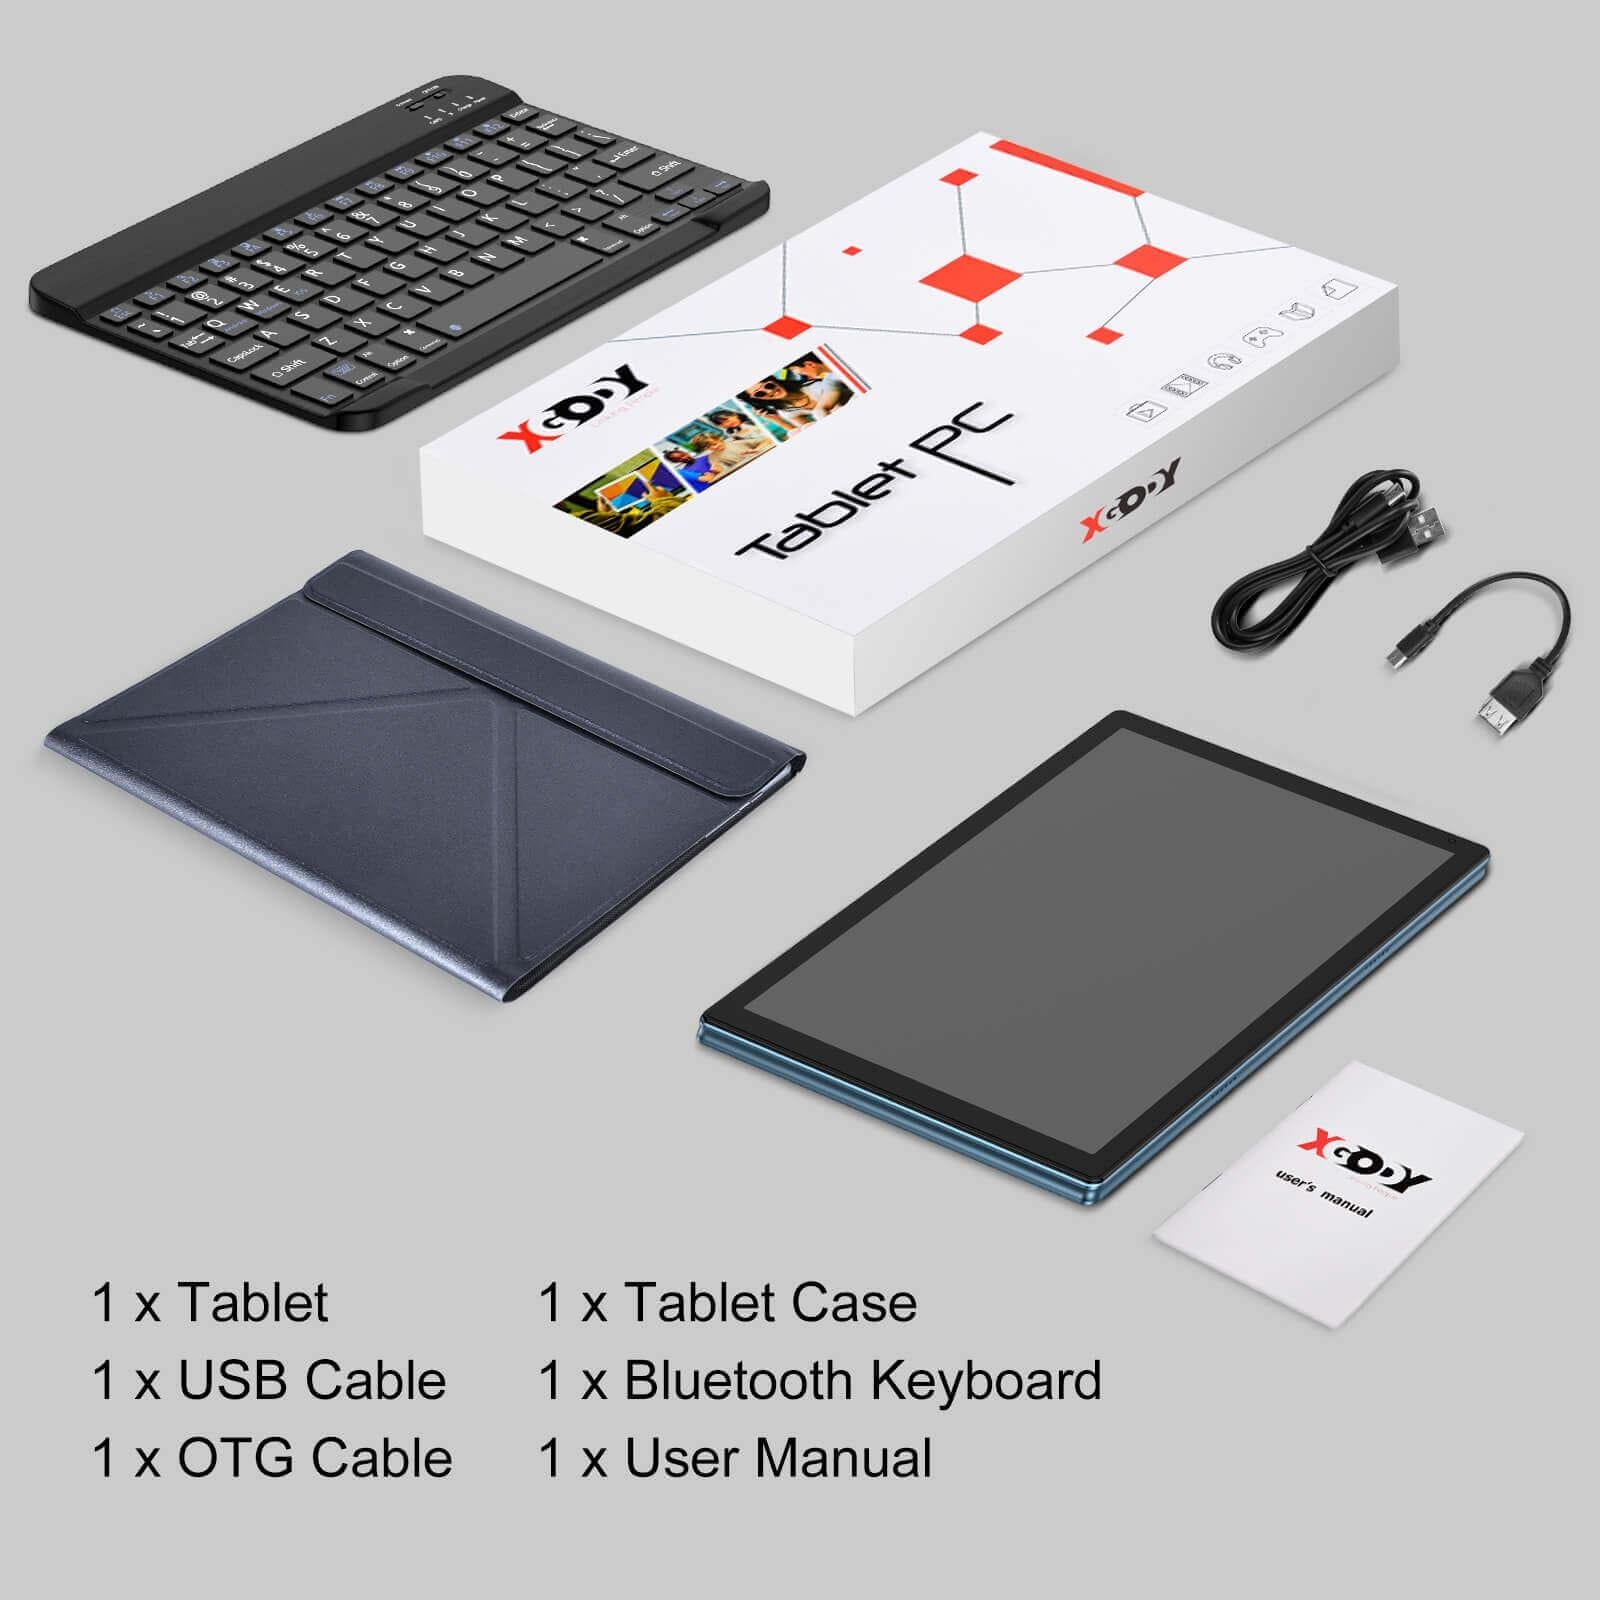 Cost-effective and Most worthwhile Top 10.4 Inch Android Tablet With Case, Keyboard Included, XGODY DM01 64GB Tablets PC  With GPS For Working, Study - XGODY 